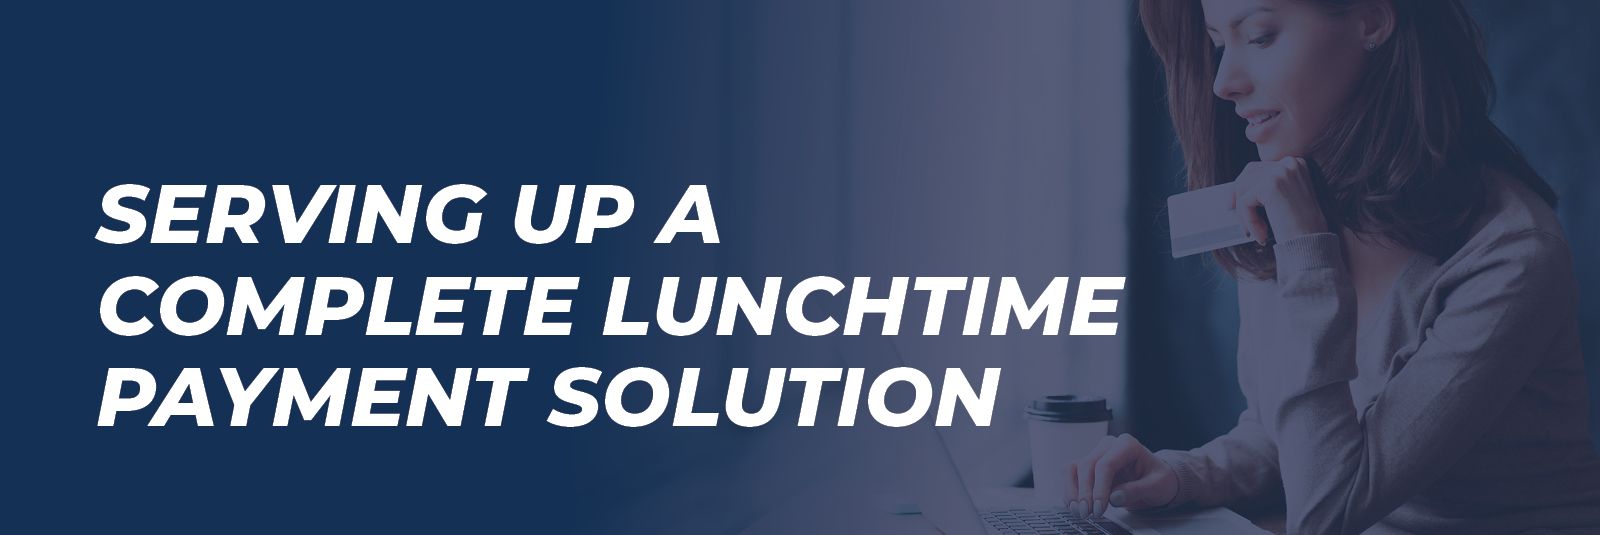 Serving Up a Complete Lunchtime Payment Solution with RevTrak